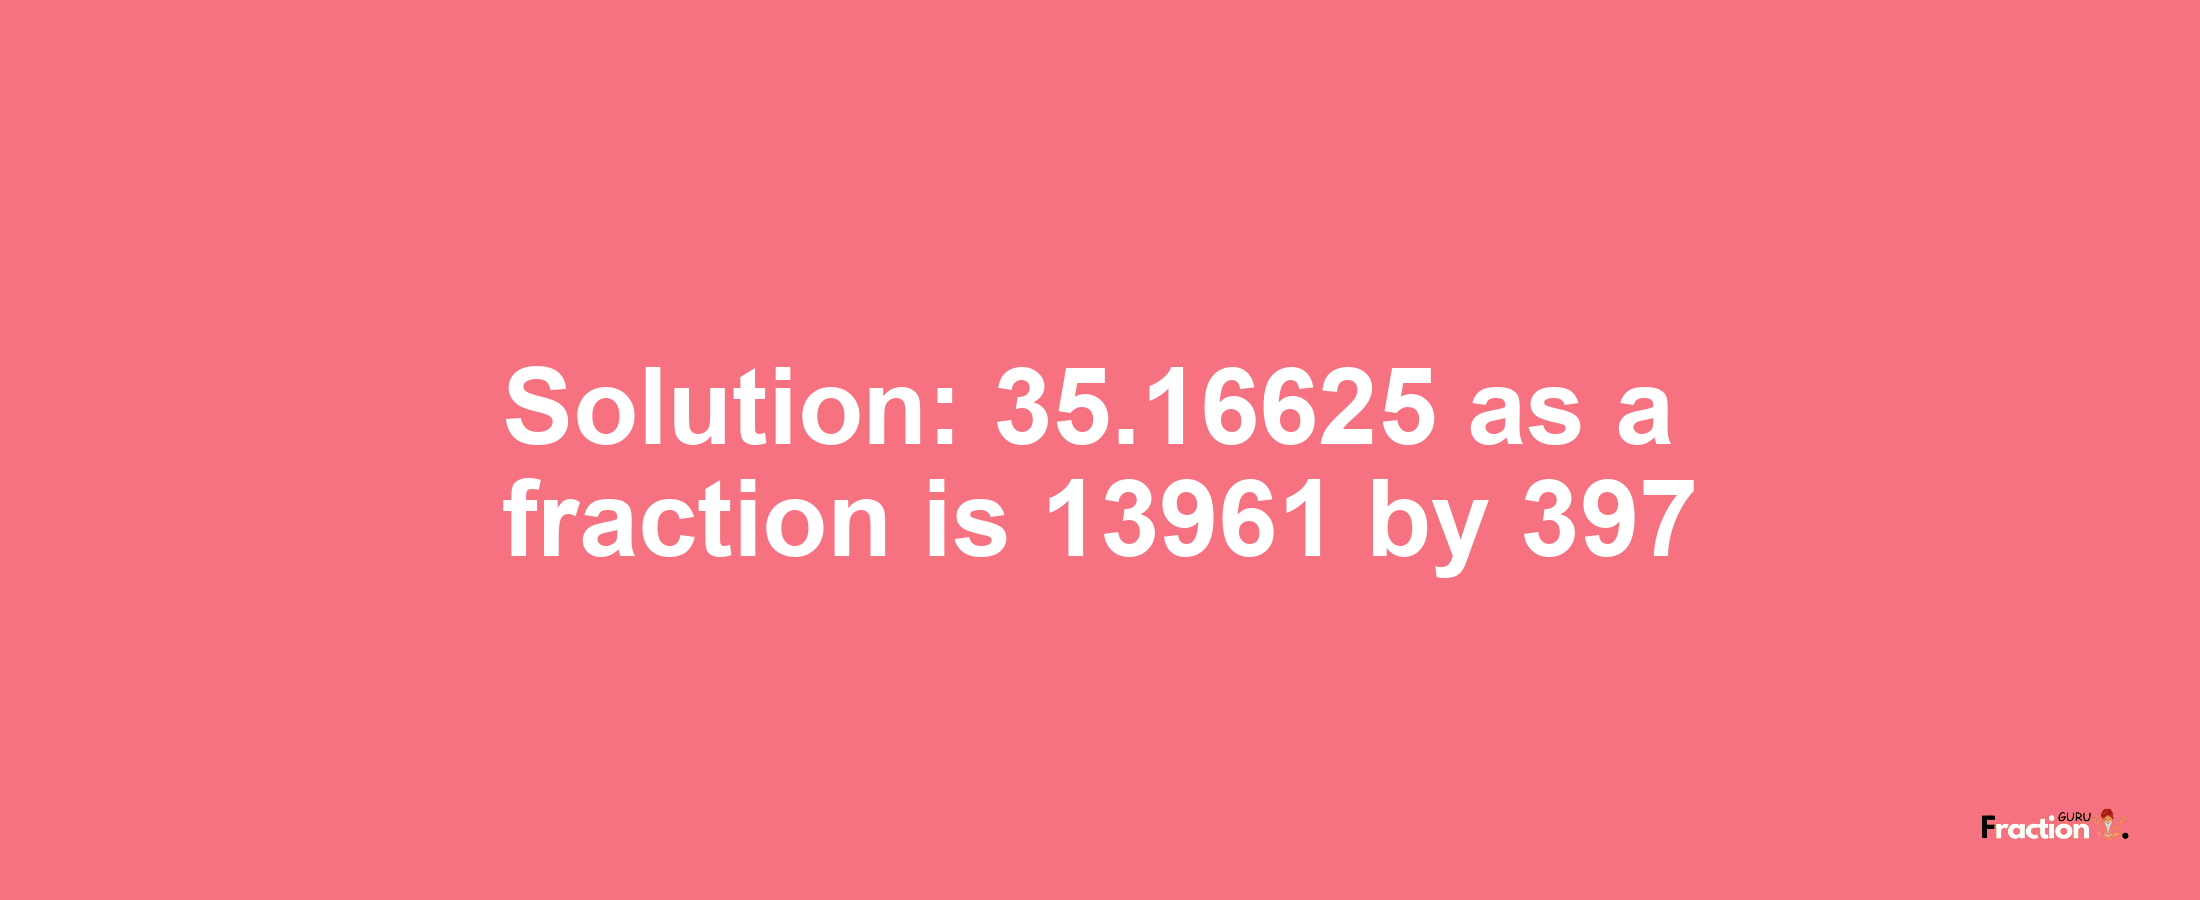 Solution:35.16625 as a fraction is 13961/397